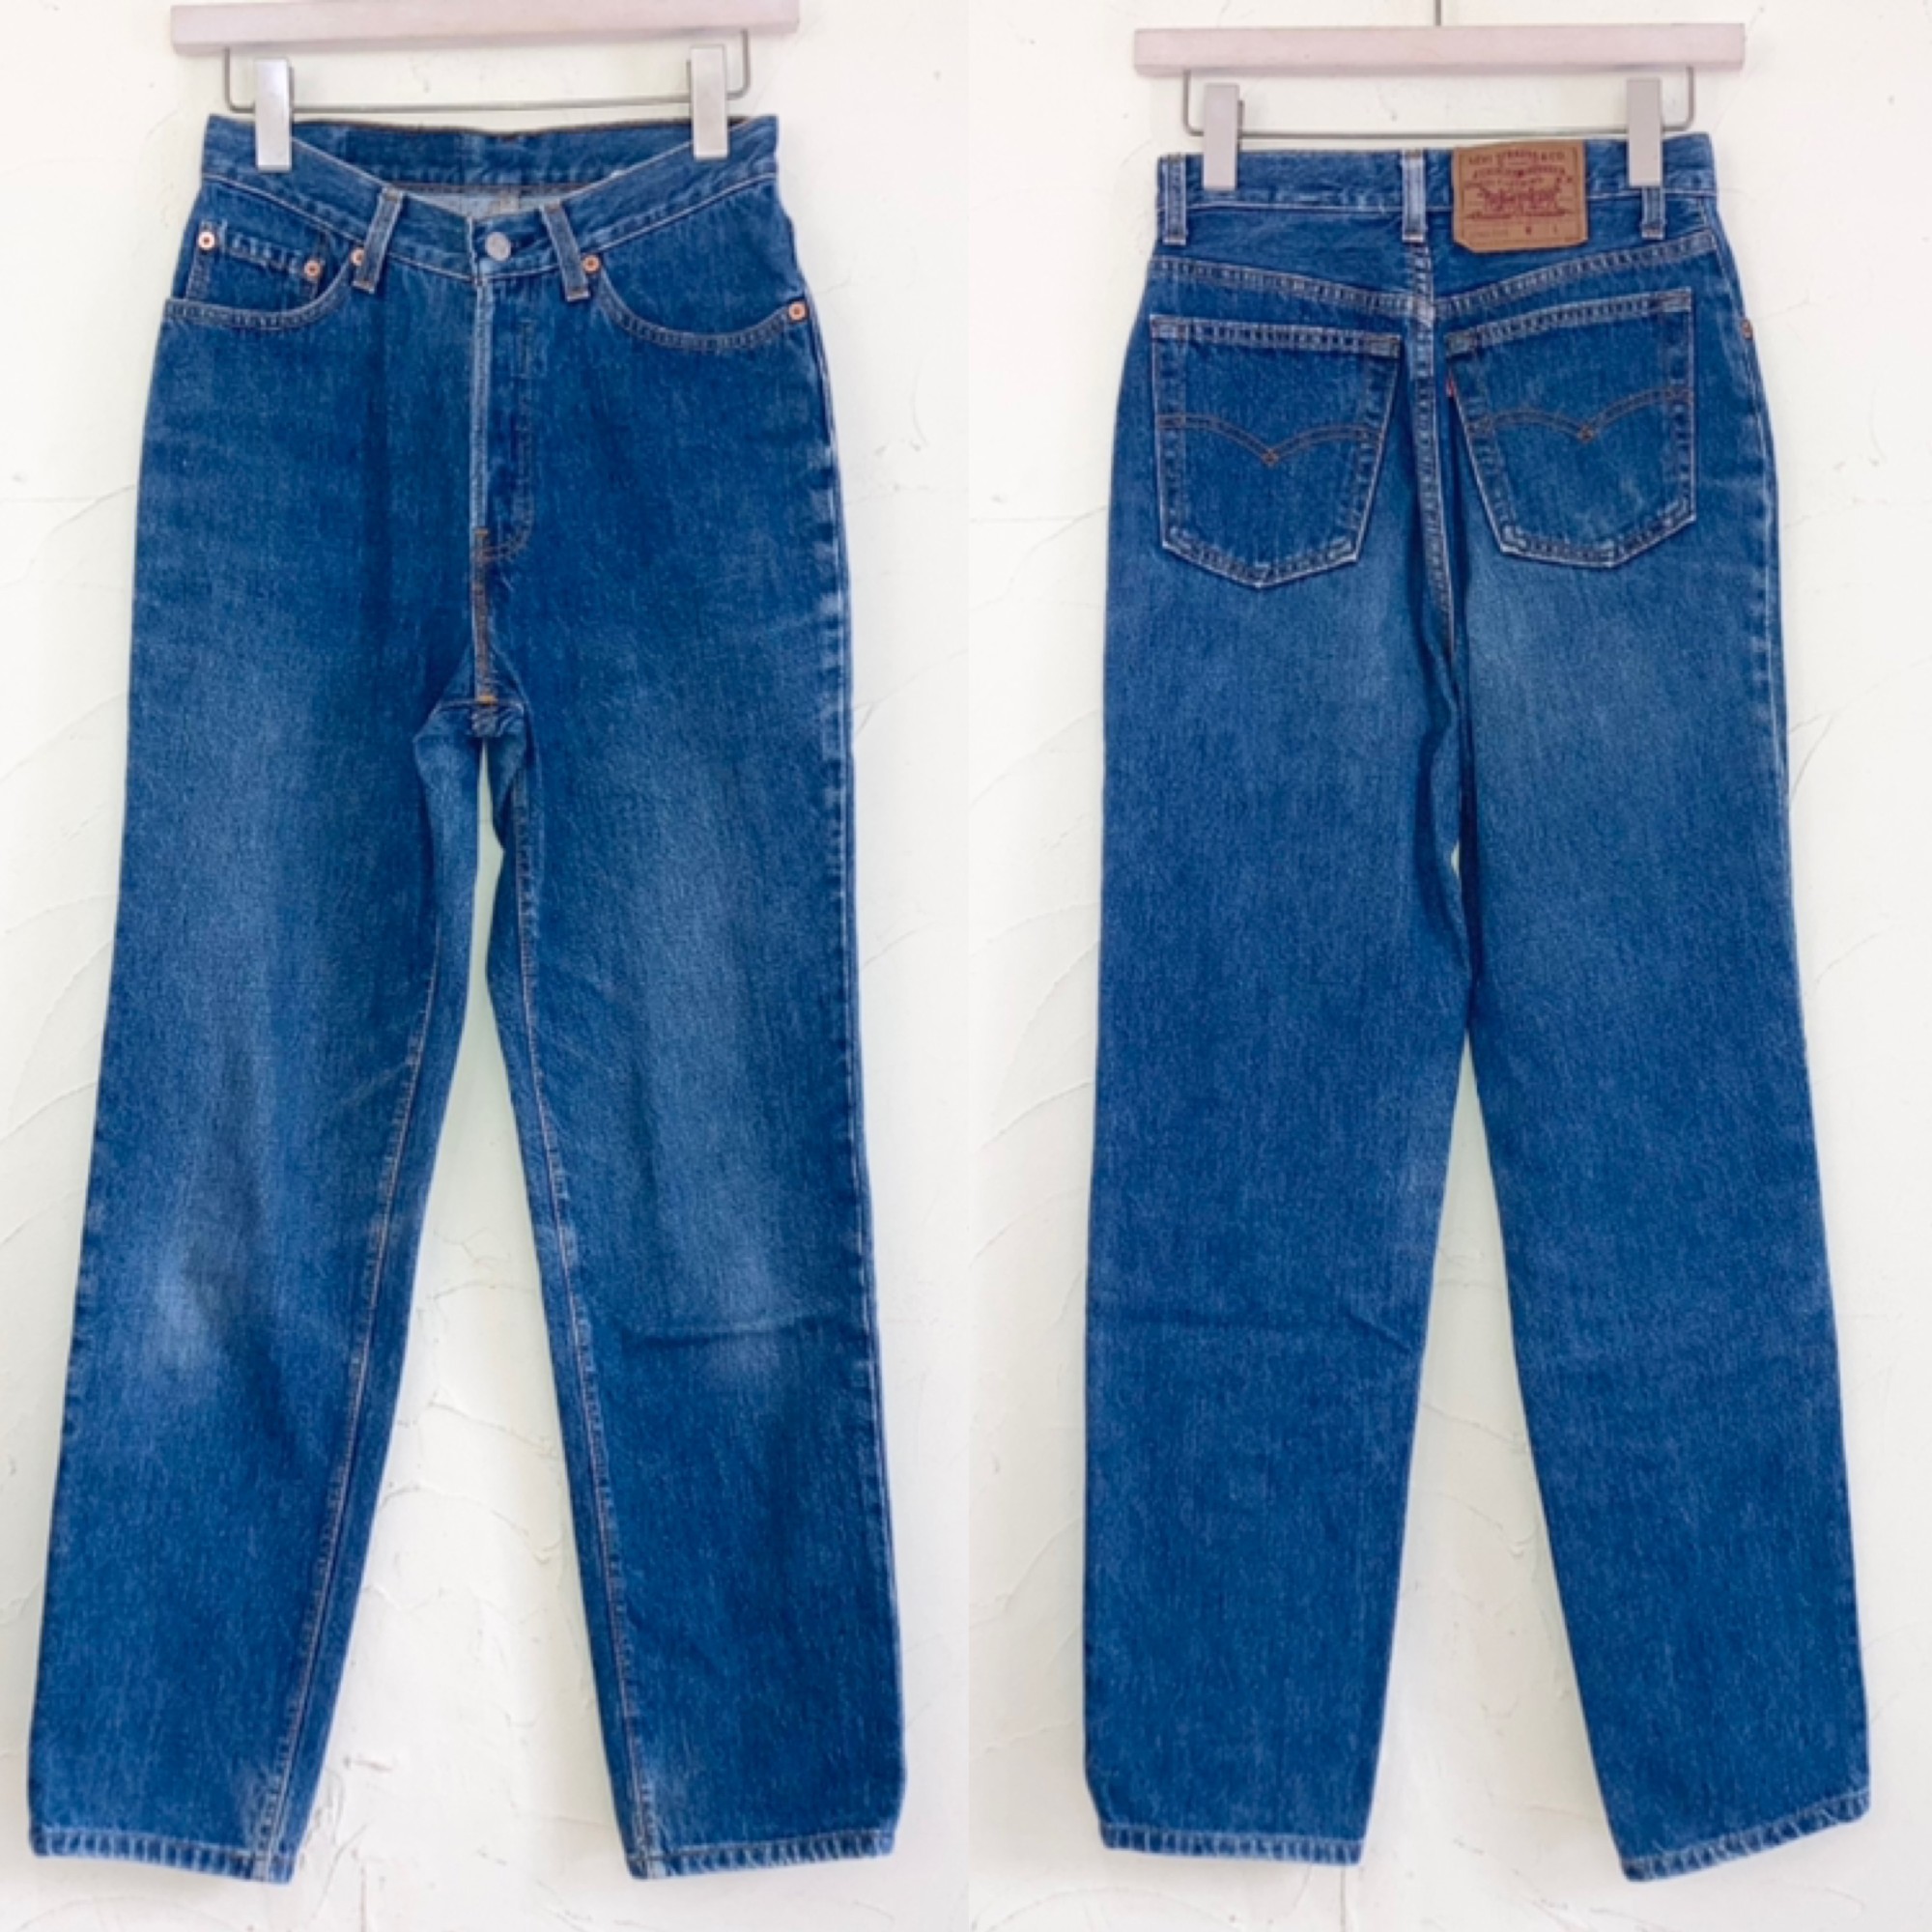 Made in USA Levi's 17501 denim pants